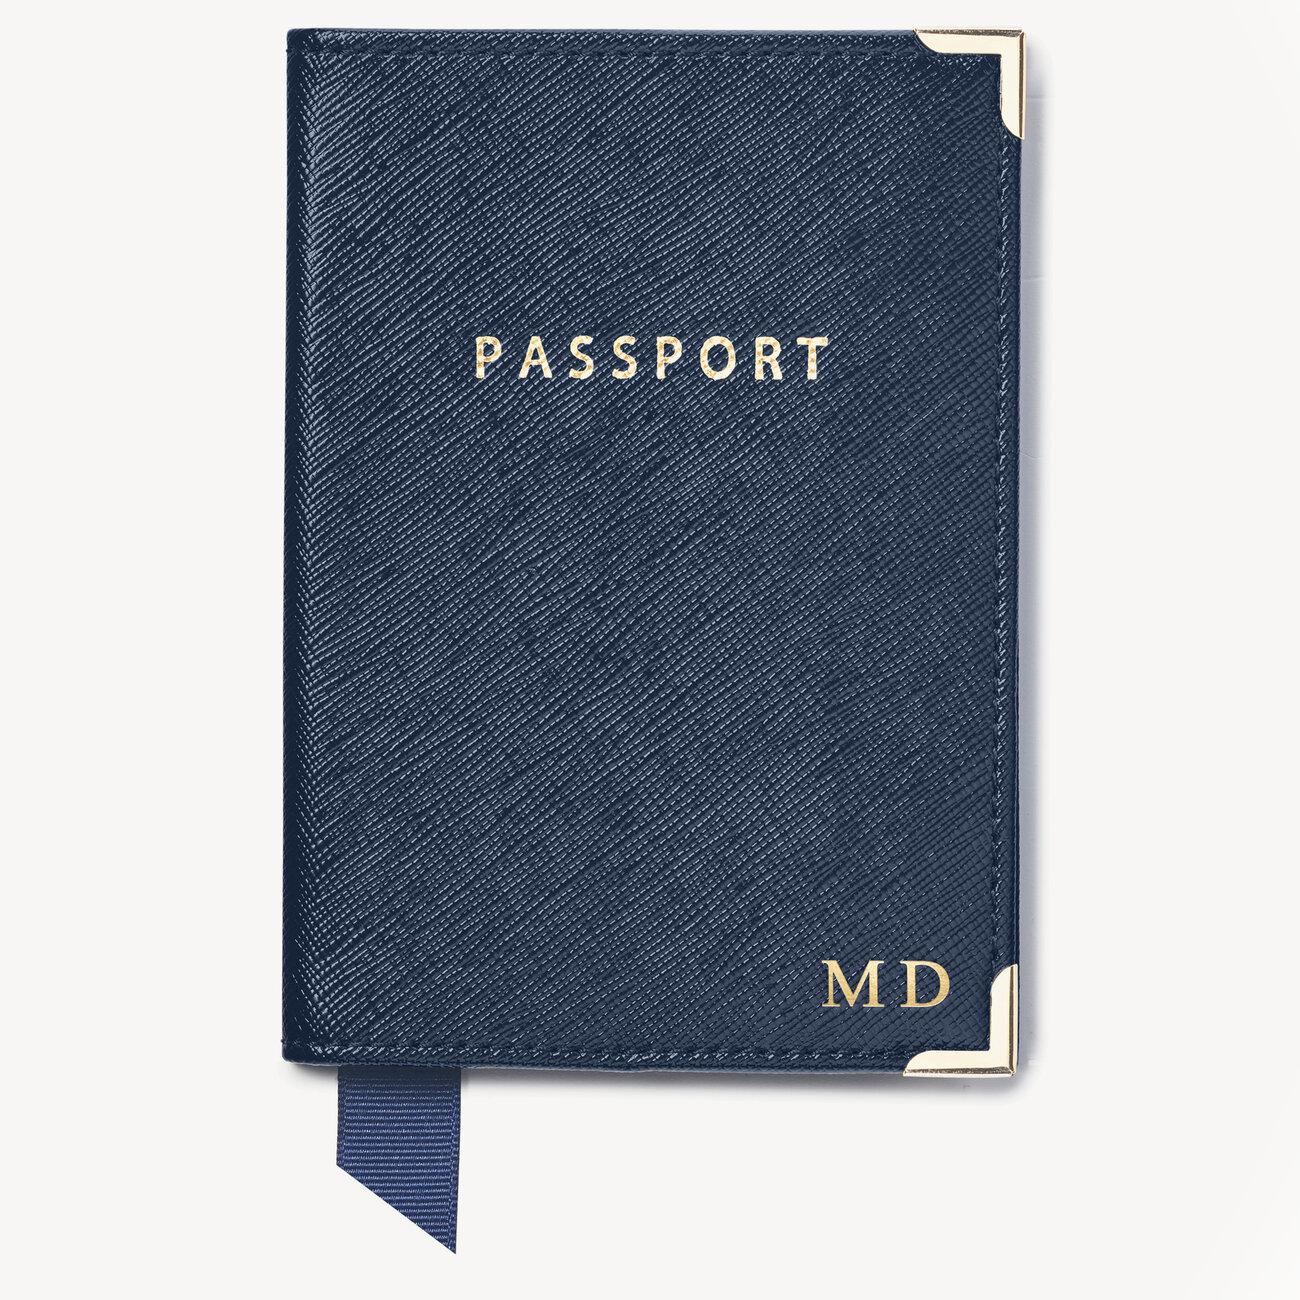 An extra-special gift for a travel-loving friend